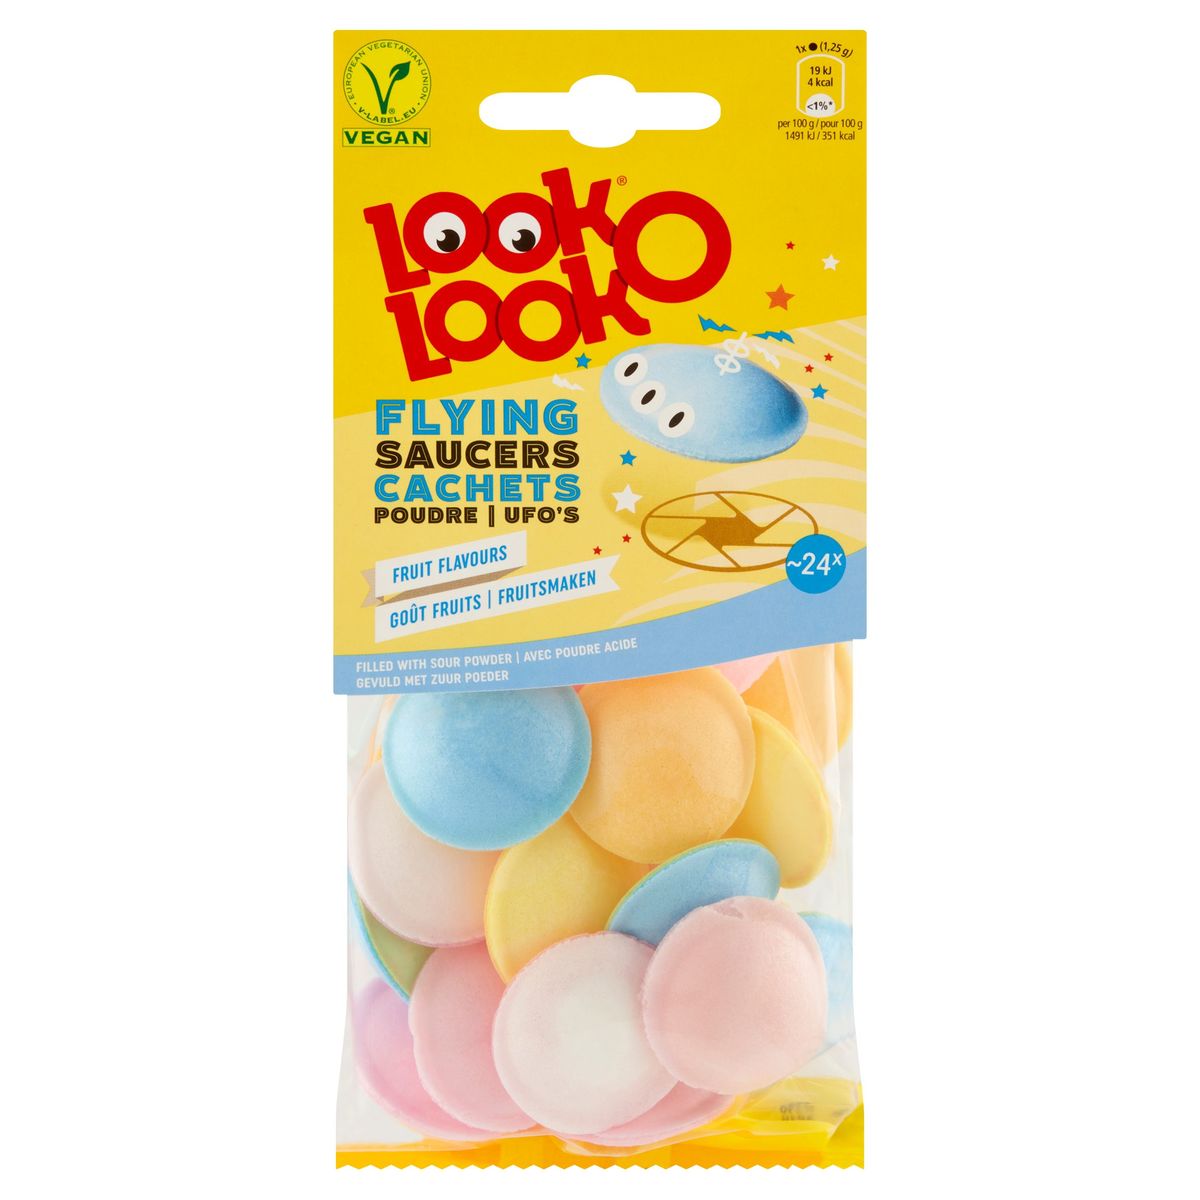 Look-O-Look Flying Saucers Cachets Poudre UFO's Goût Fruits 30 g